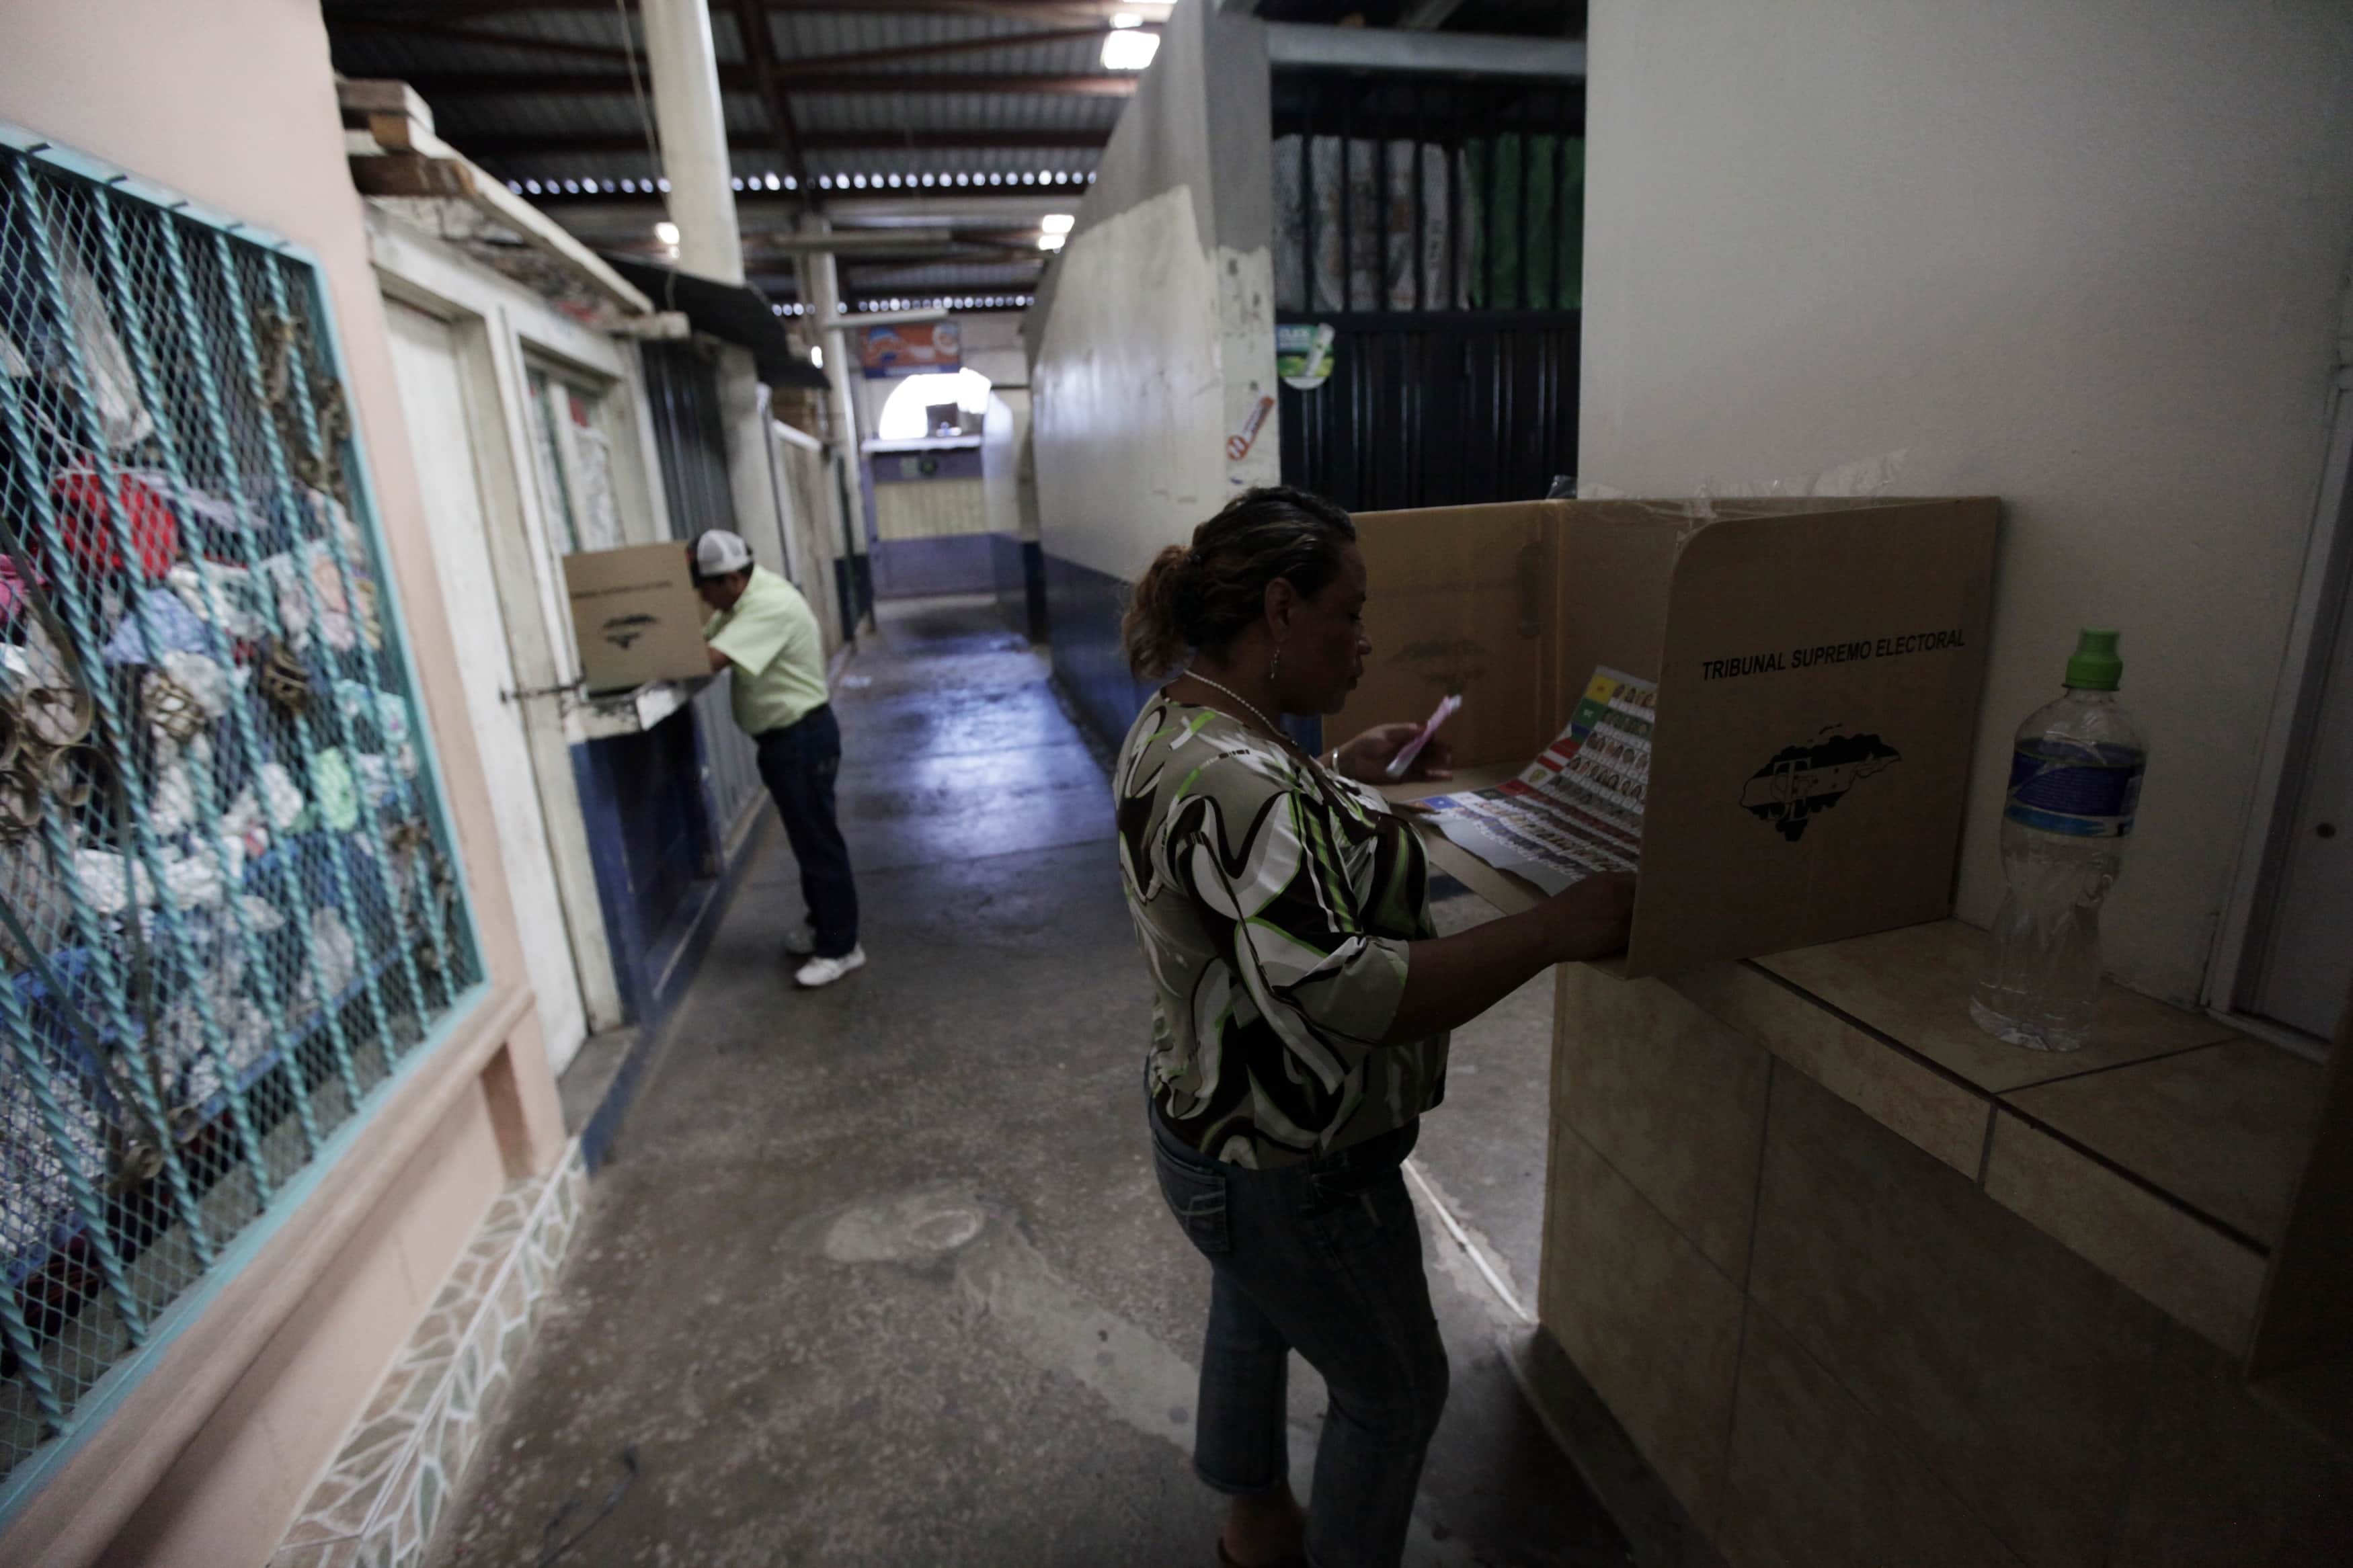 People cast their votes at a polling station in Tegucigalpa November 24, 2013, REUTERS/Jorge Cabrera